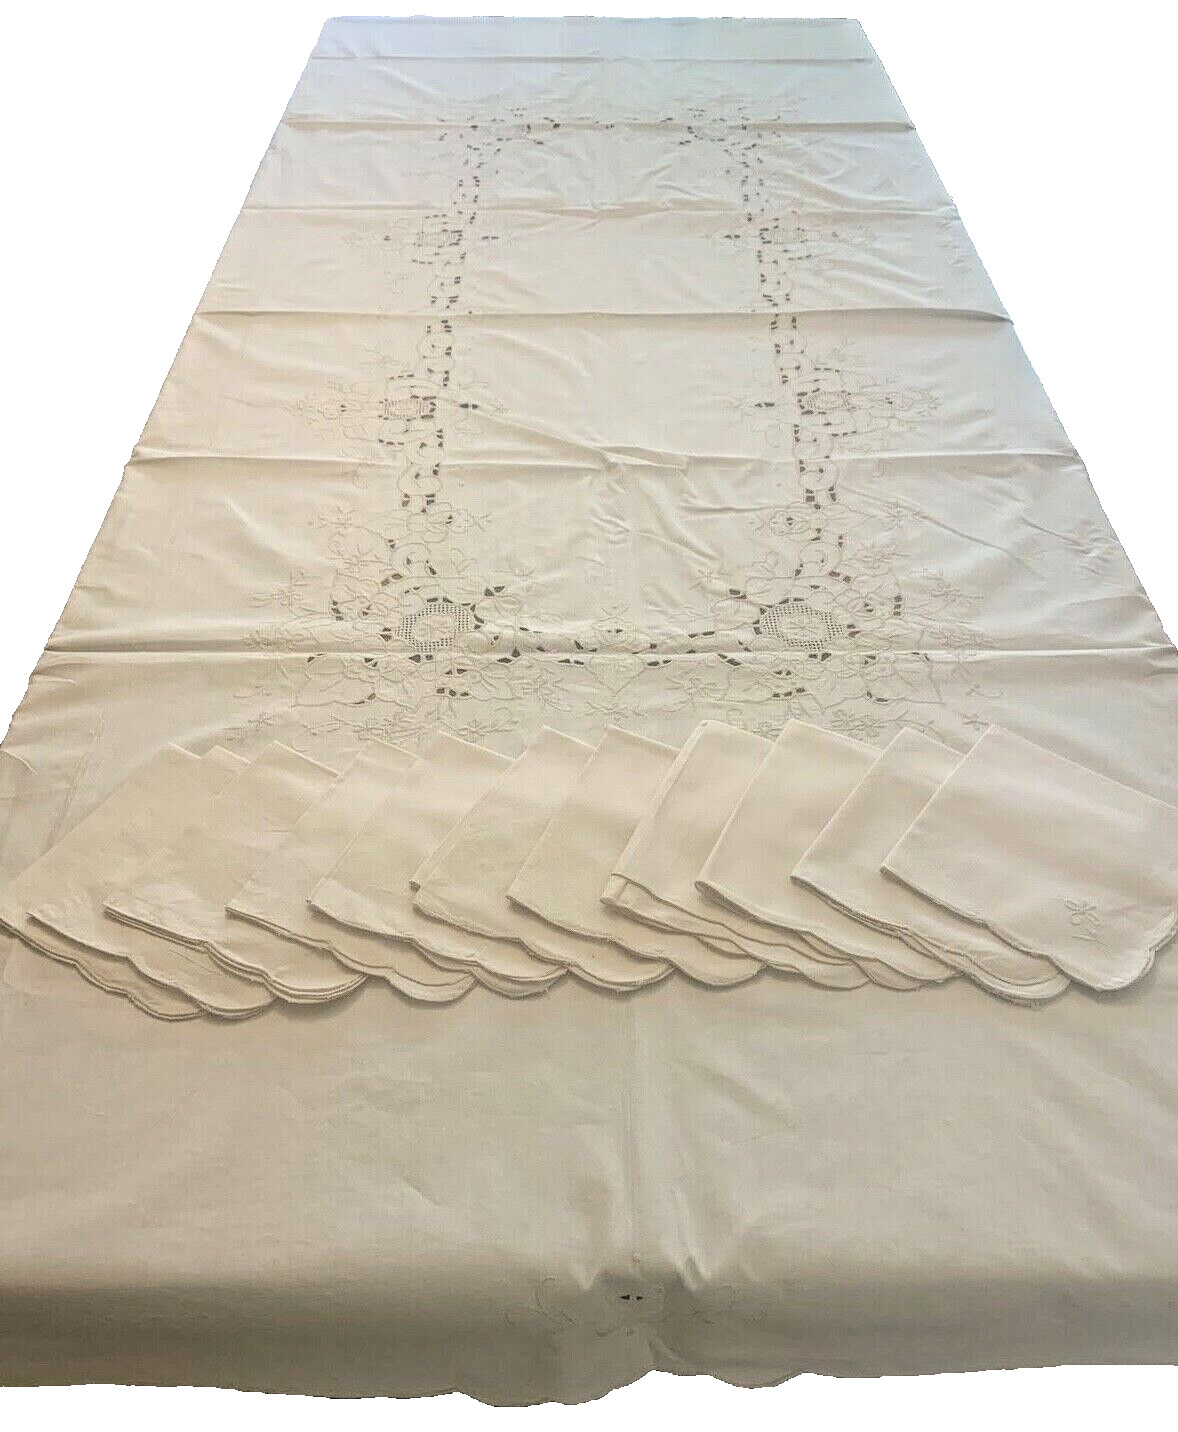 Banquet Tablecloth 11 Napkins Embroidered Cream Ivory Linen 68x100 Gorgeous